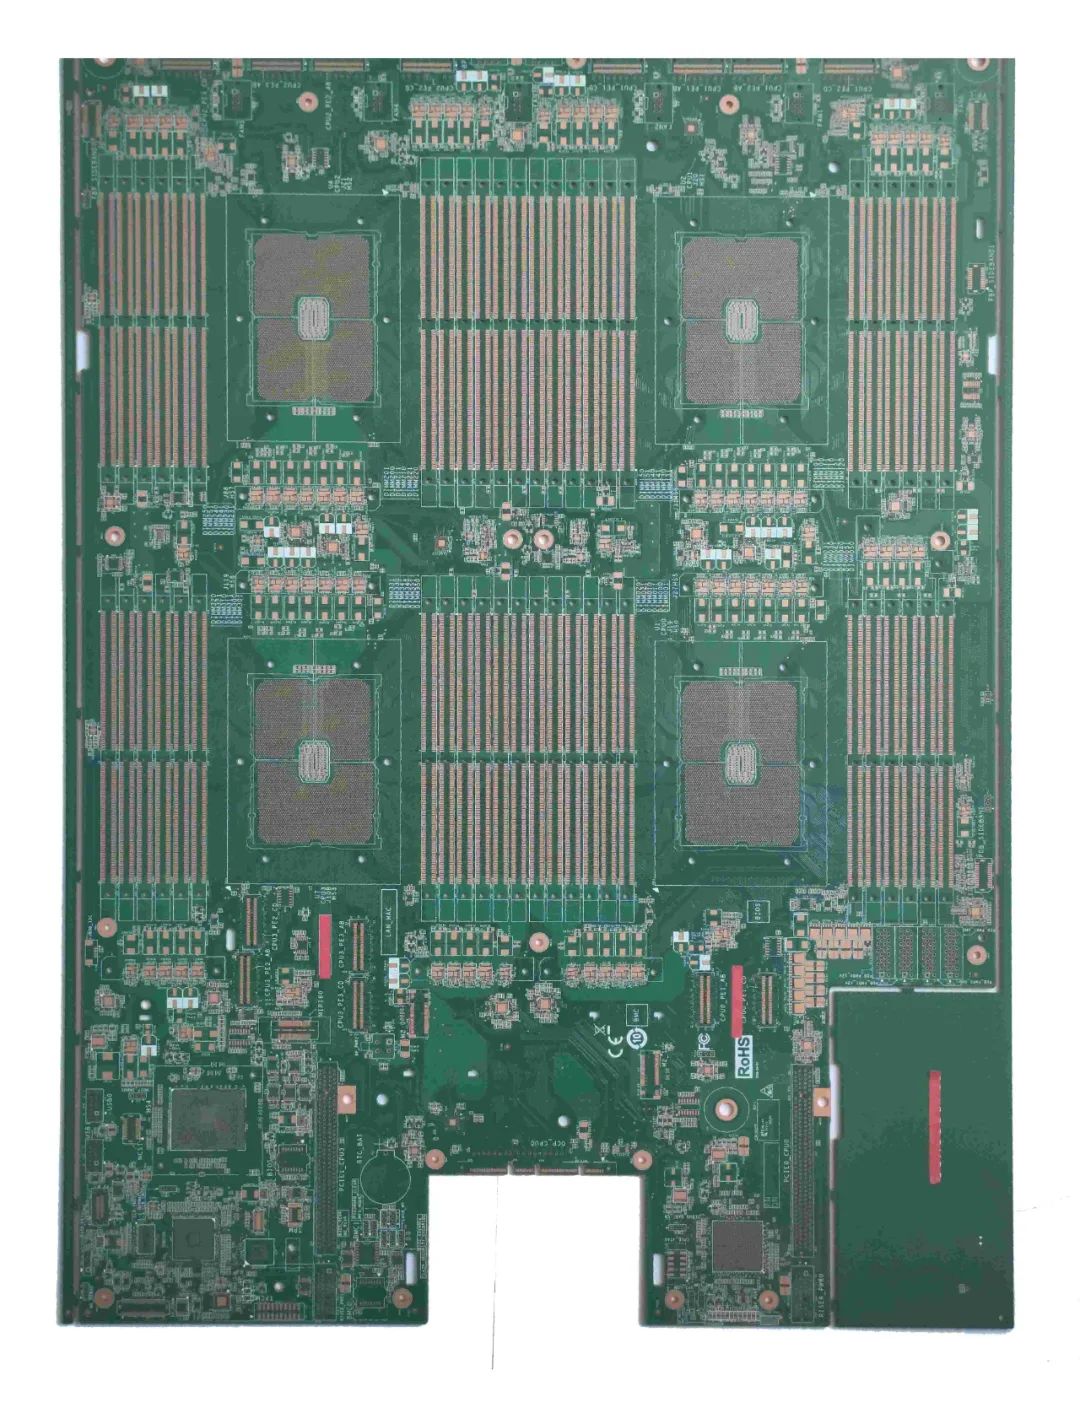 Oversized four-way server motherboard